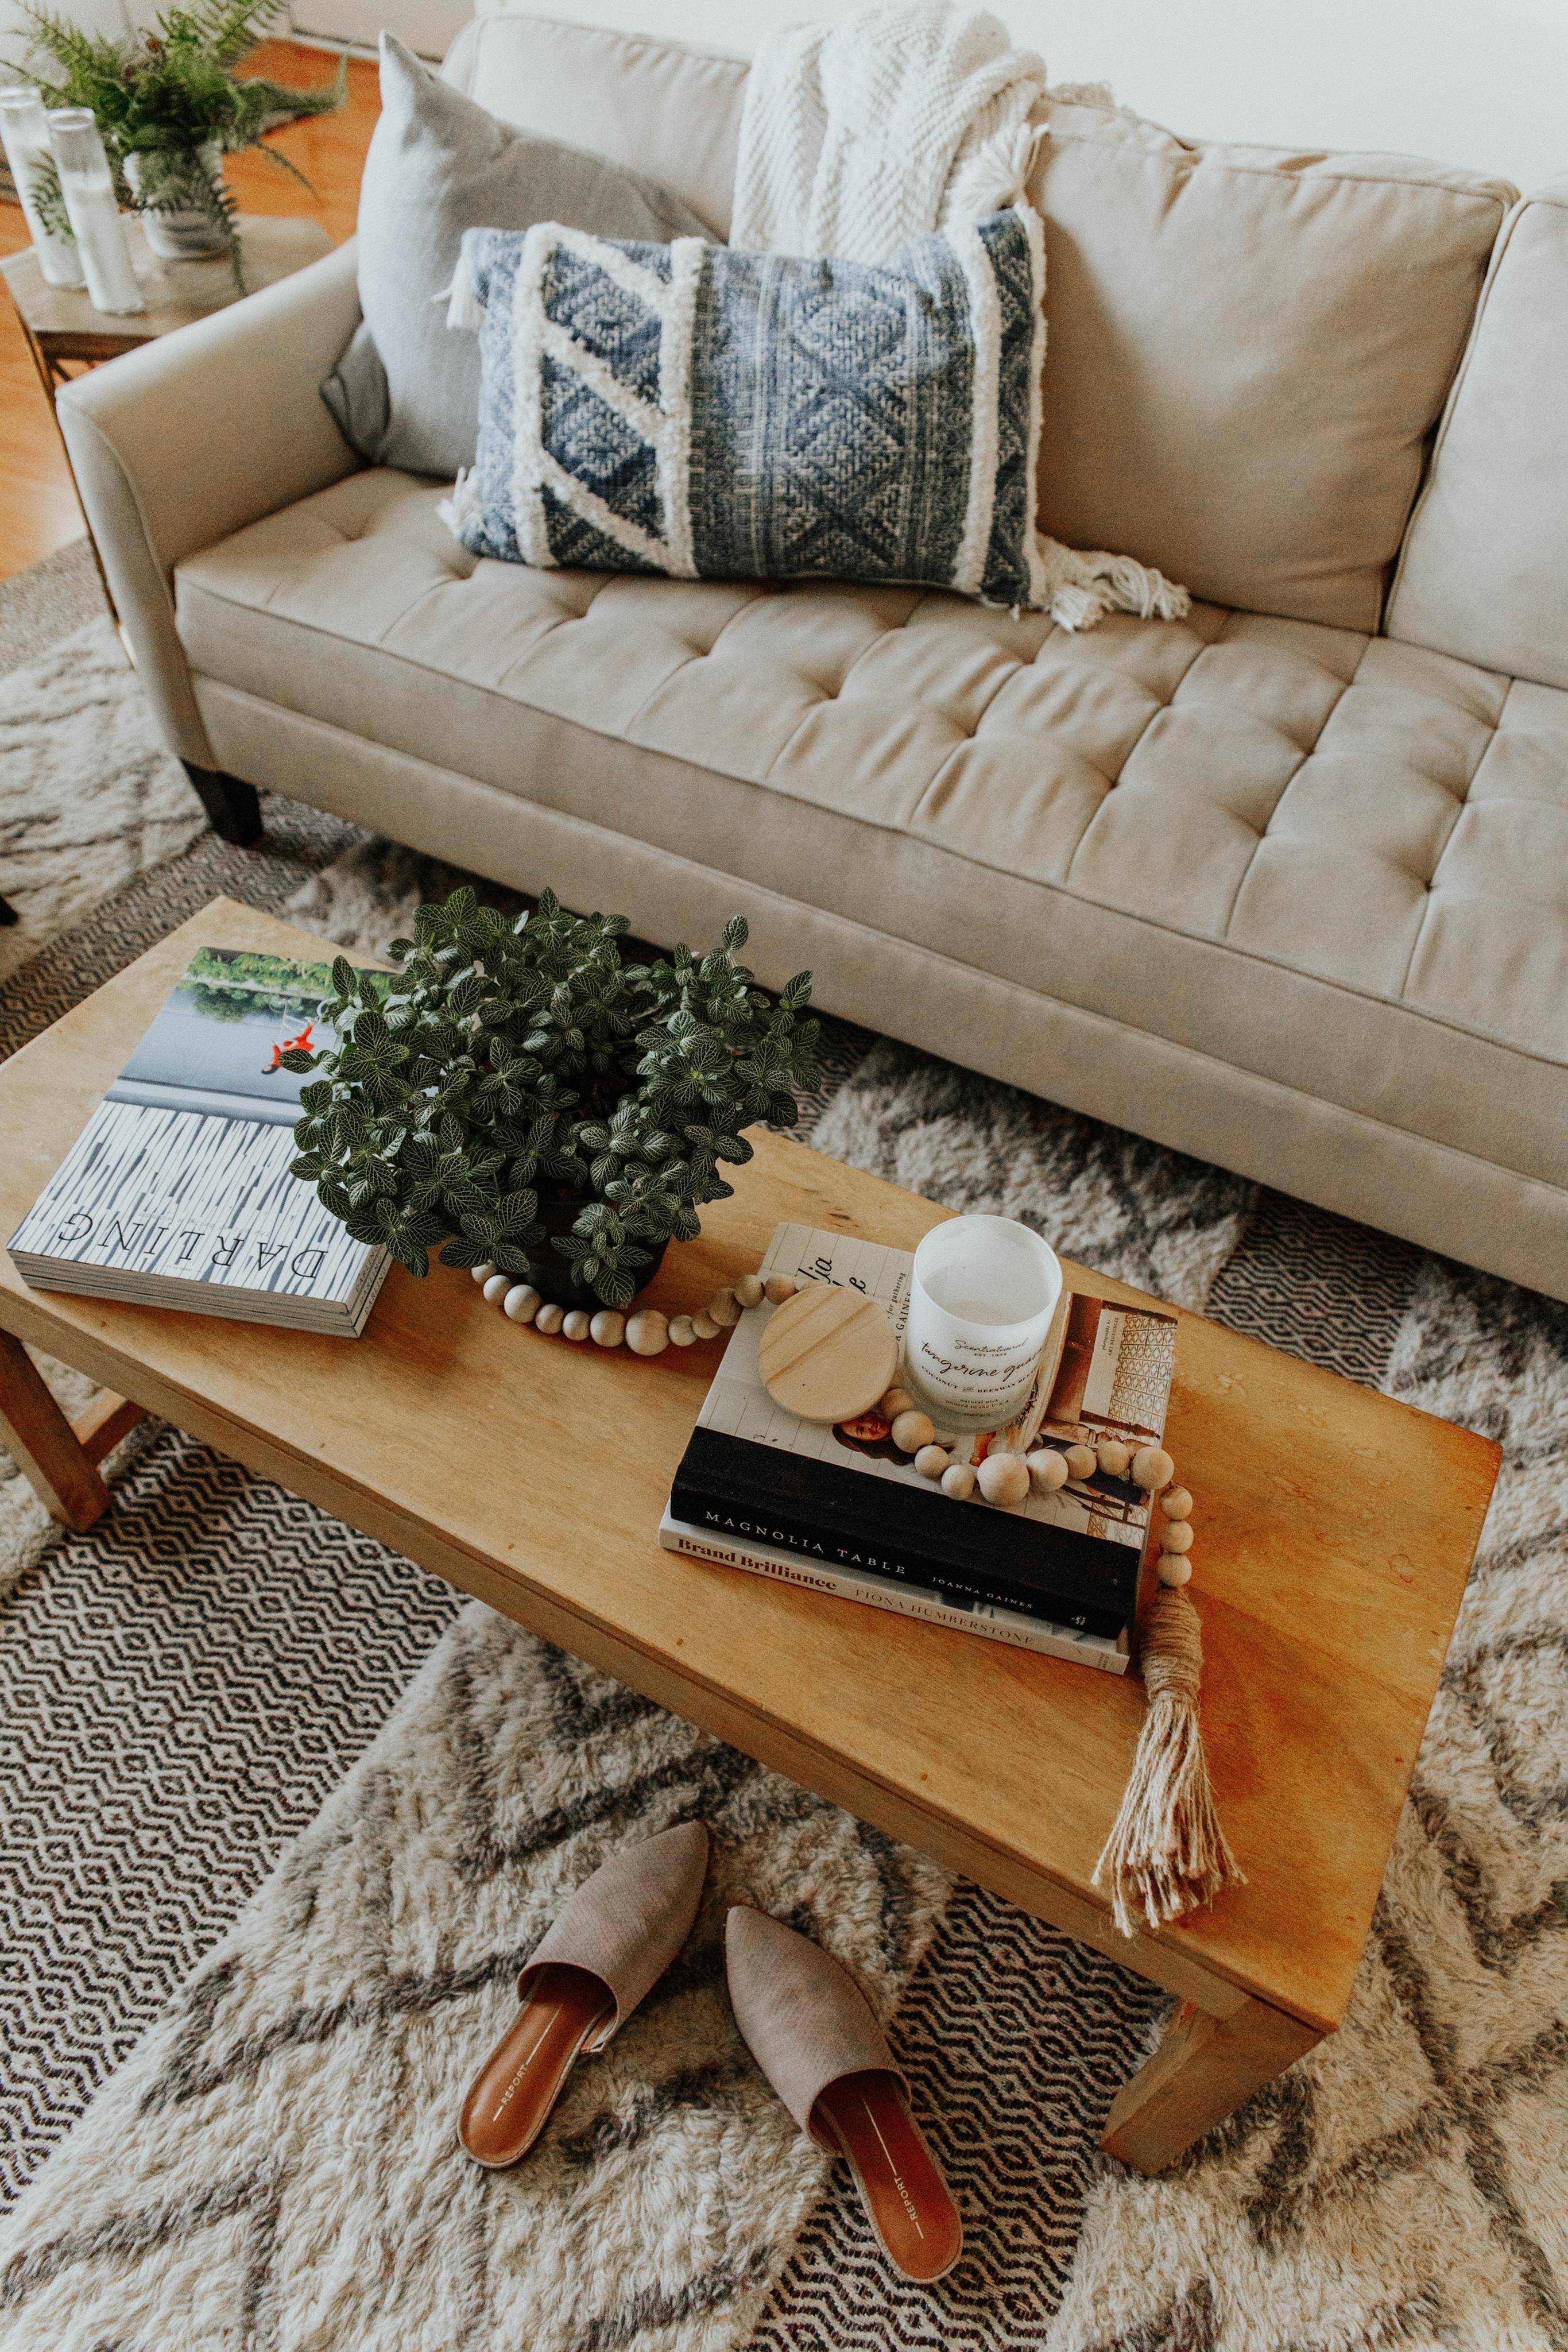 livingroom - close up of beige sofa and coffee table with decorative items